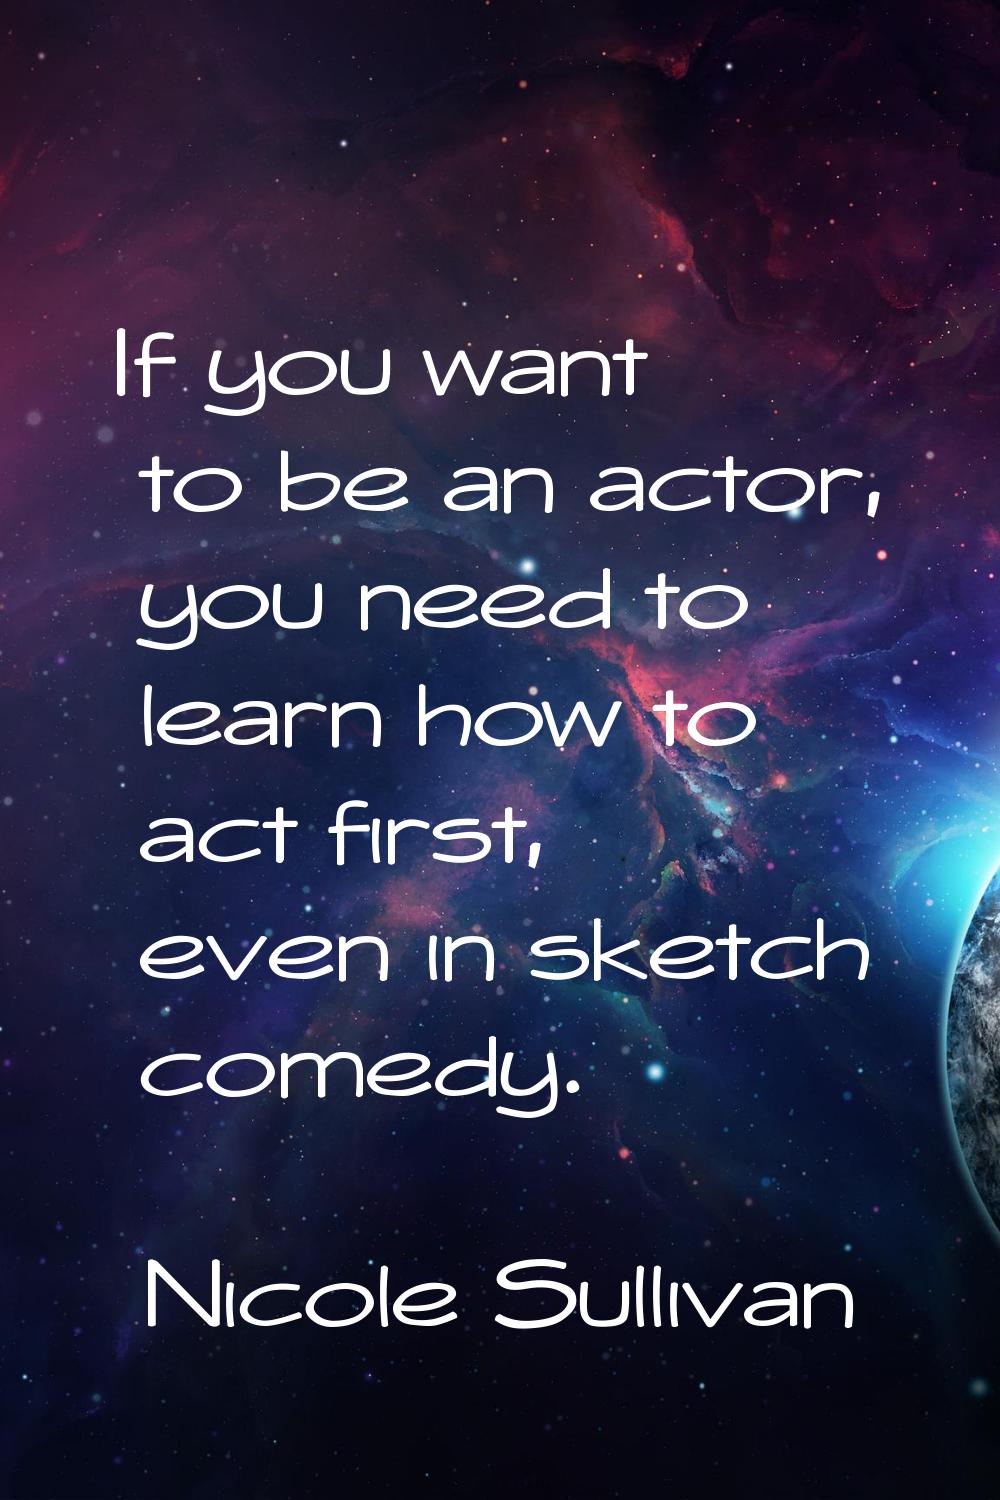 If you want to be an actor, you need to learn how to act first, even in sketch comedy.